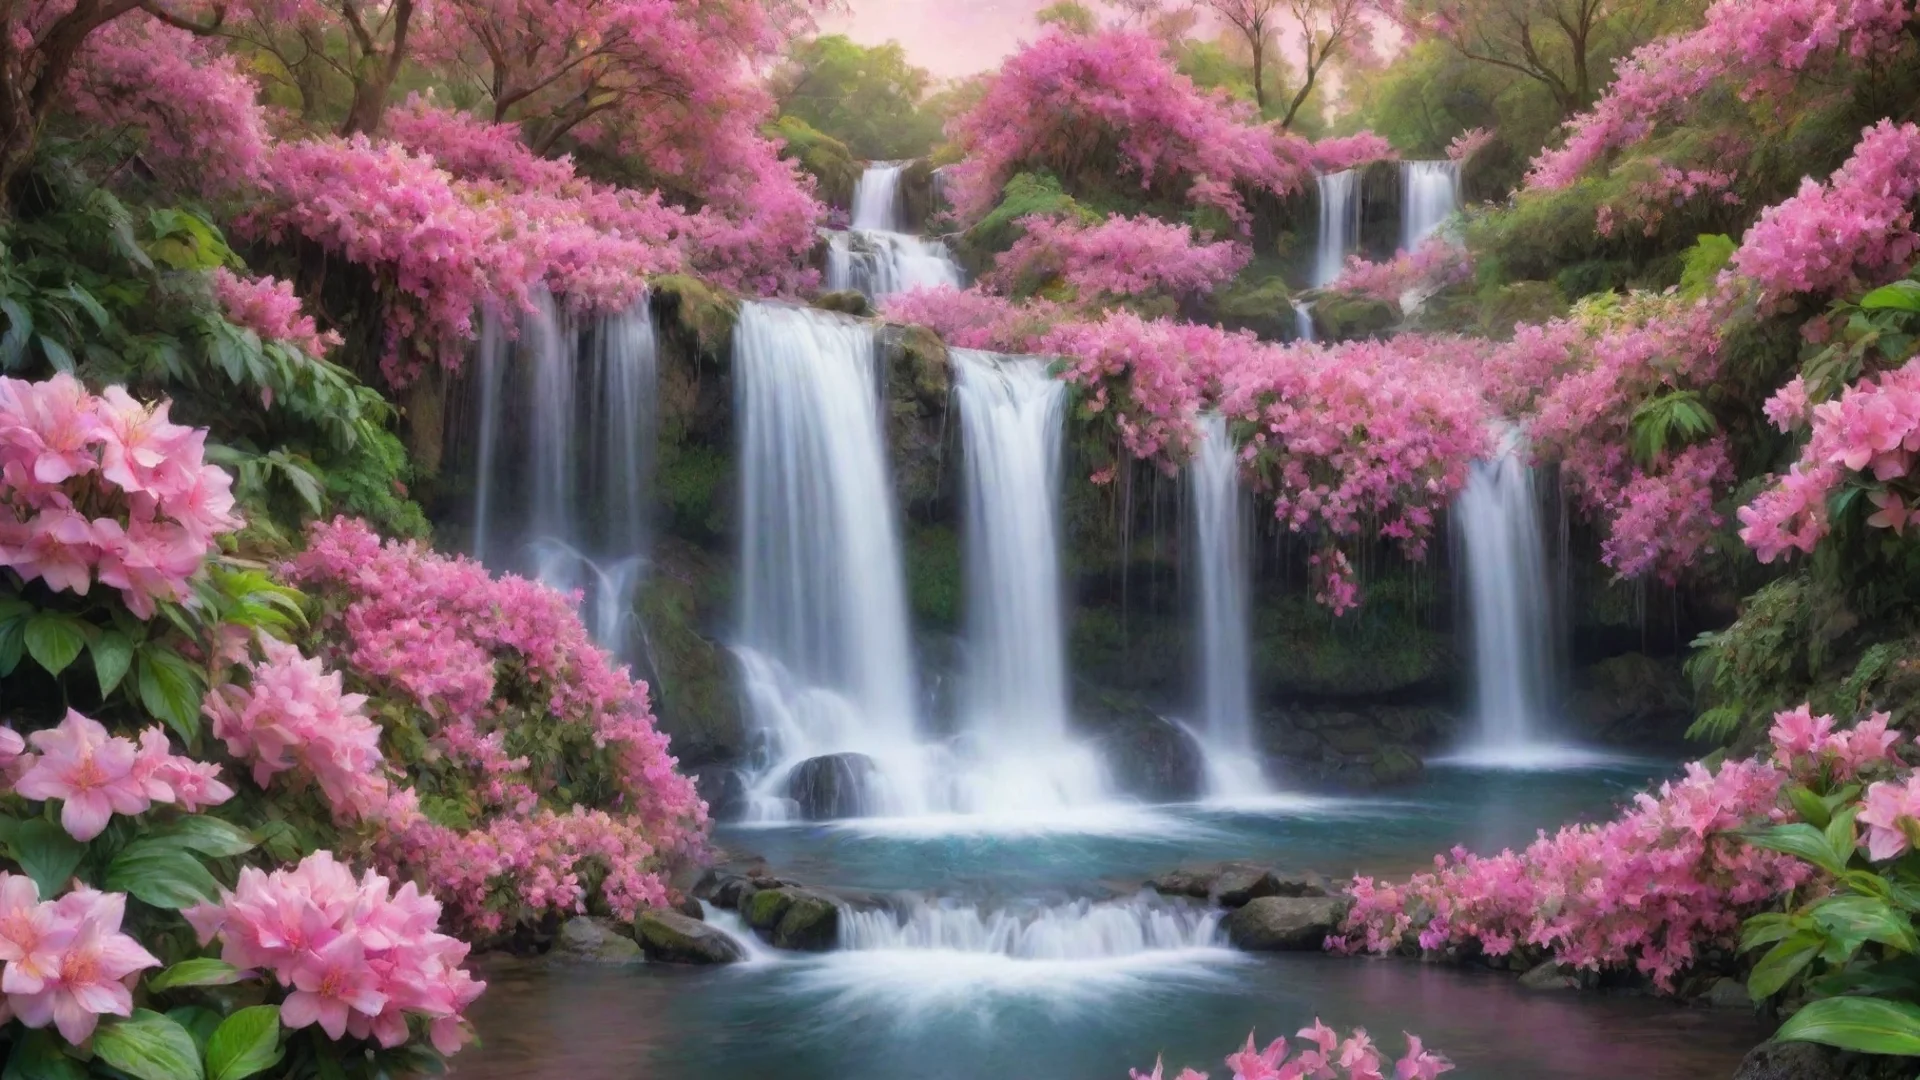 aiamazing lovely waterfall pastel pinks greenery flowers overwhelming amazing hd starry colors awesome portrait 2 hdwidescreen